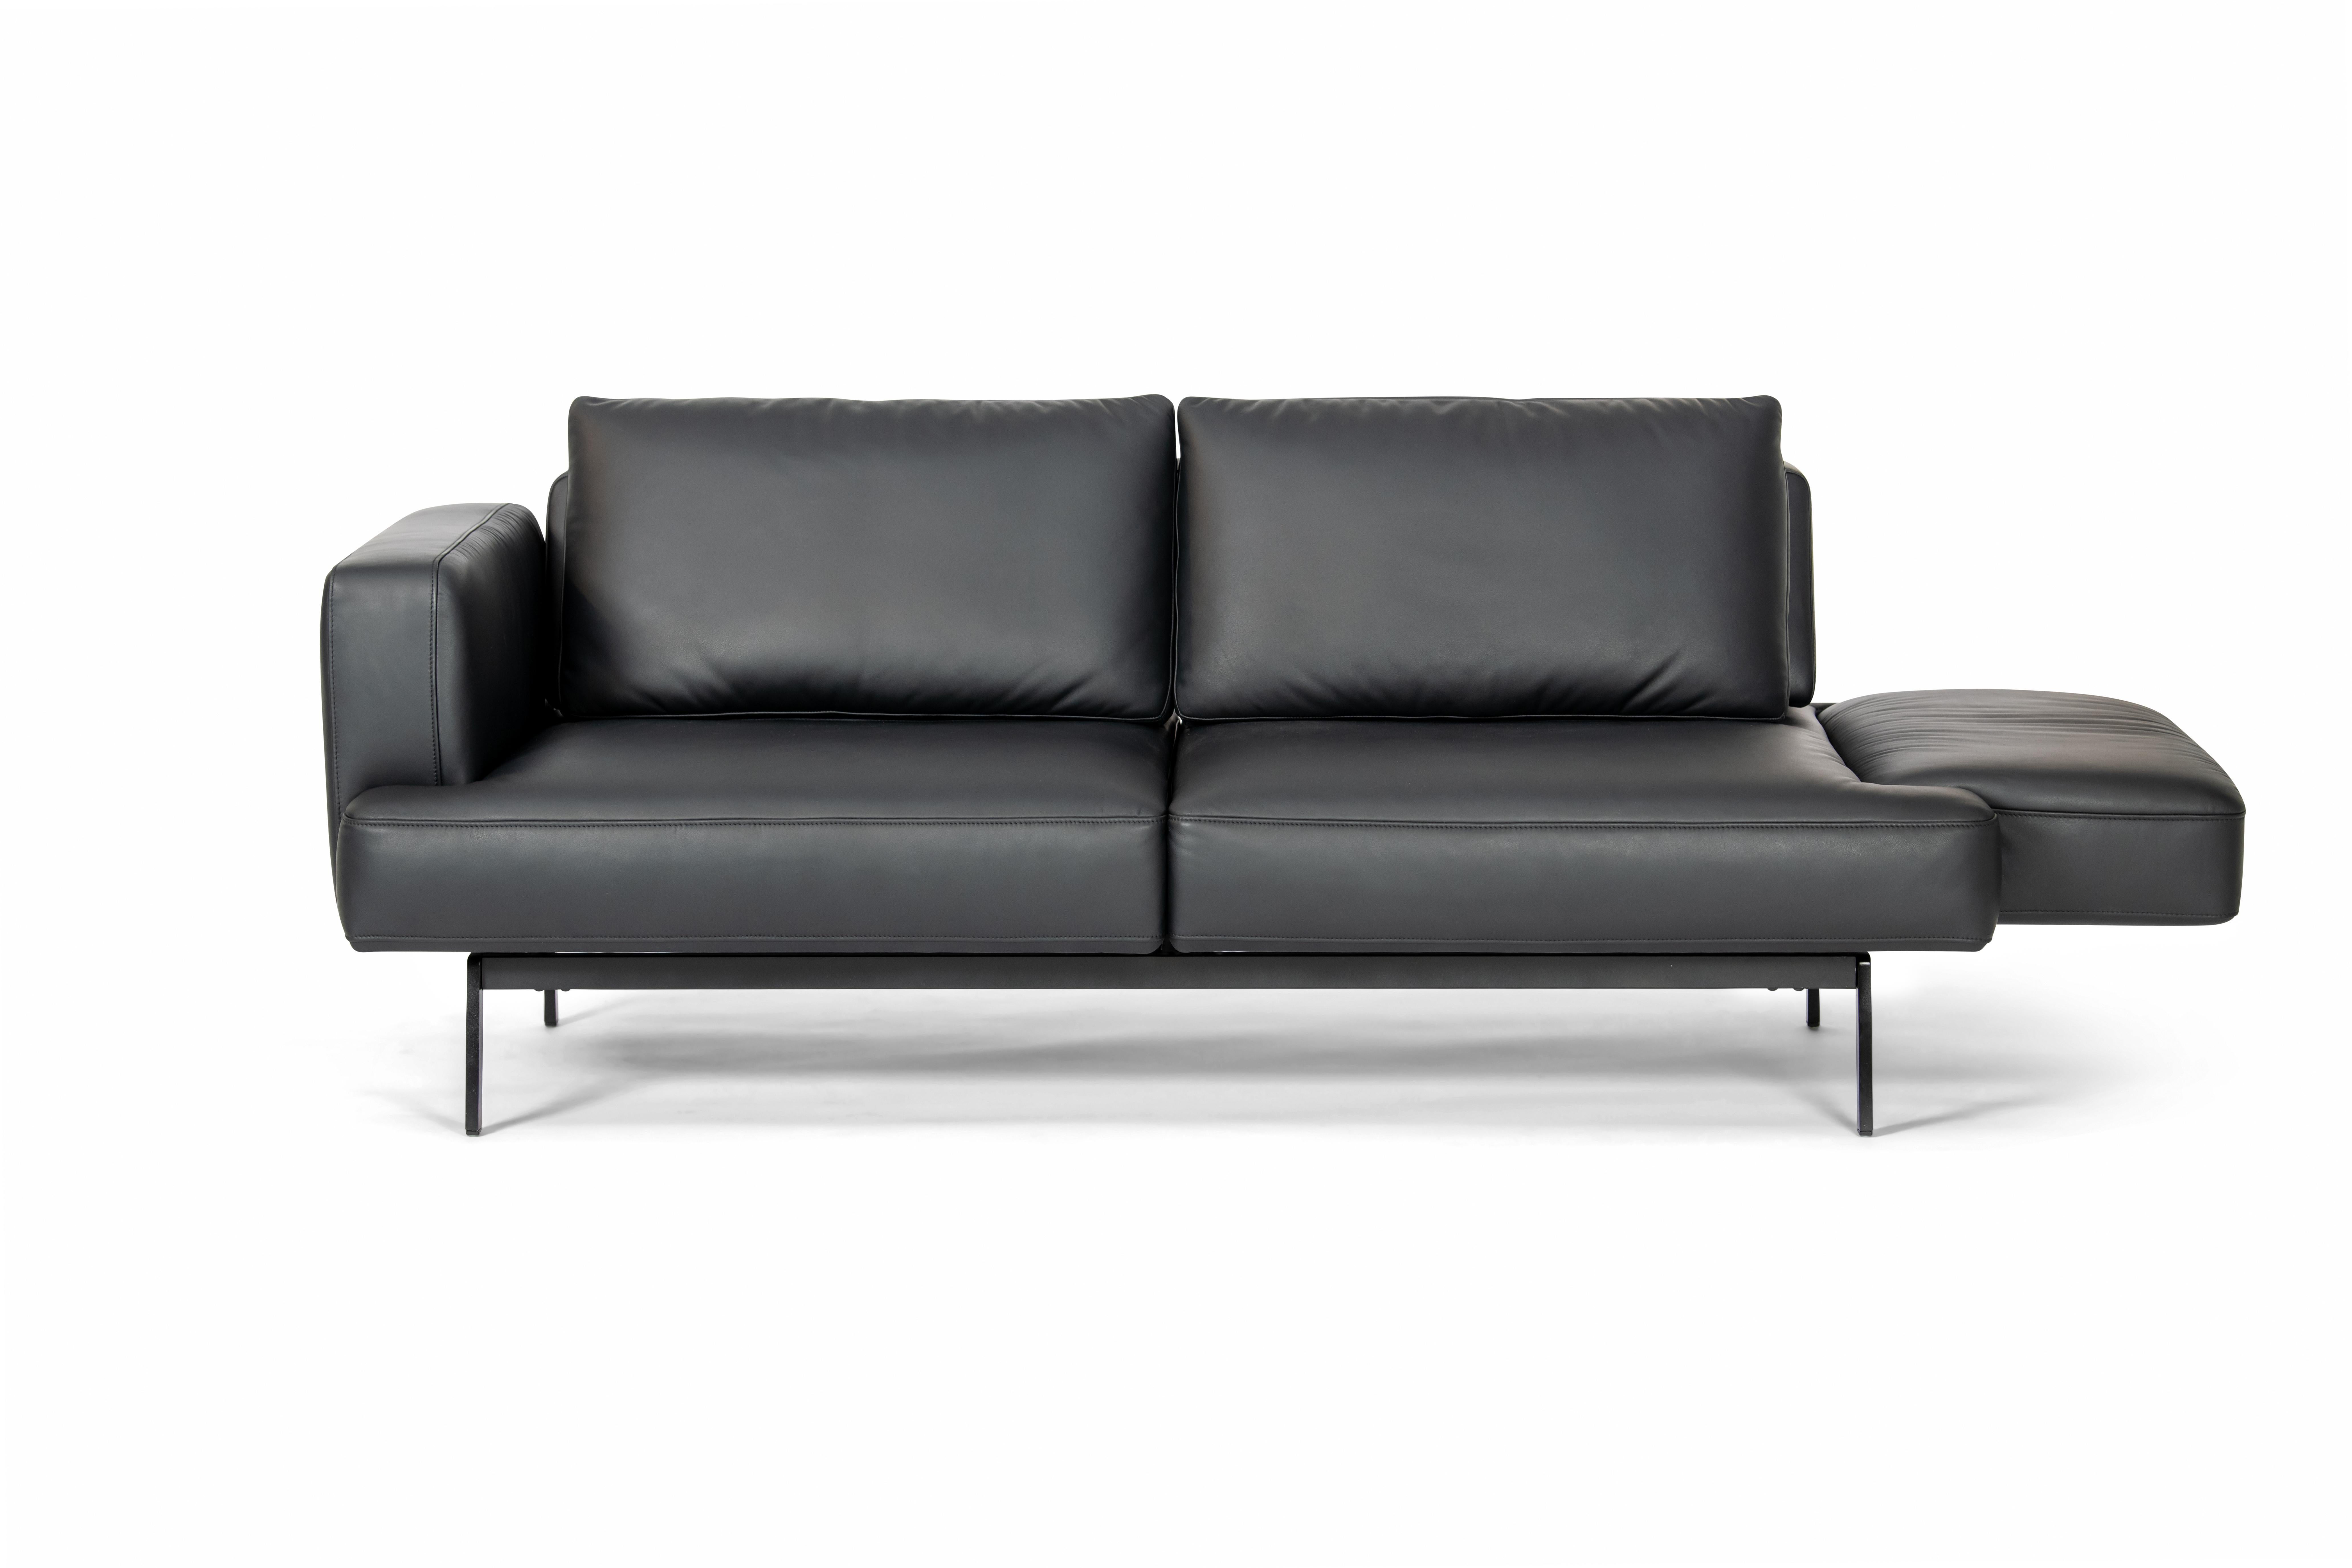 De Sede DS-747/23 Multifunctional Sofa in Black Leather Seat and Back Upholstery For Sale 2